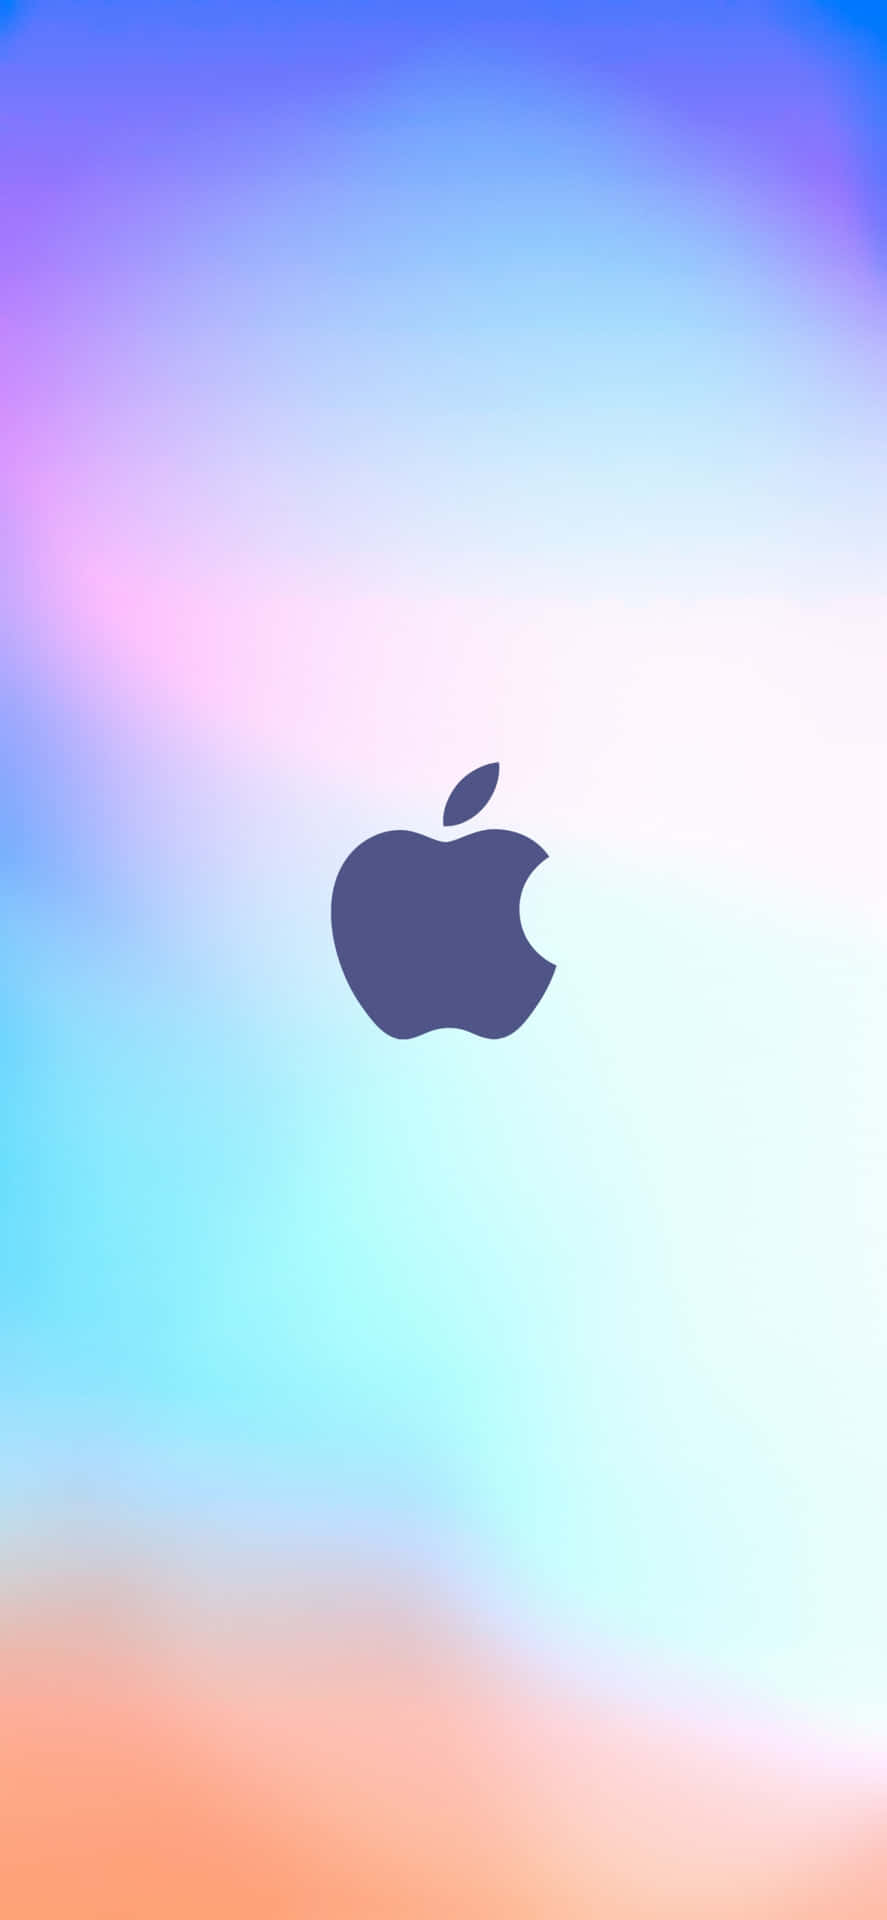 Download Iphone X Pictures | Wallpapers.com